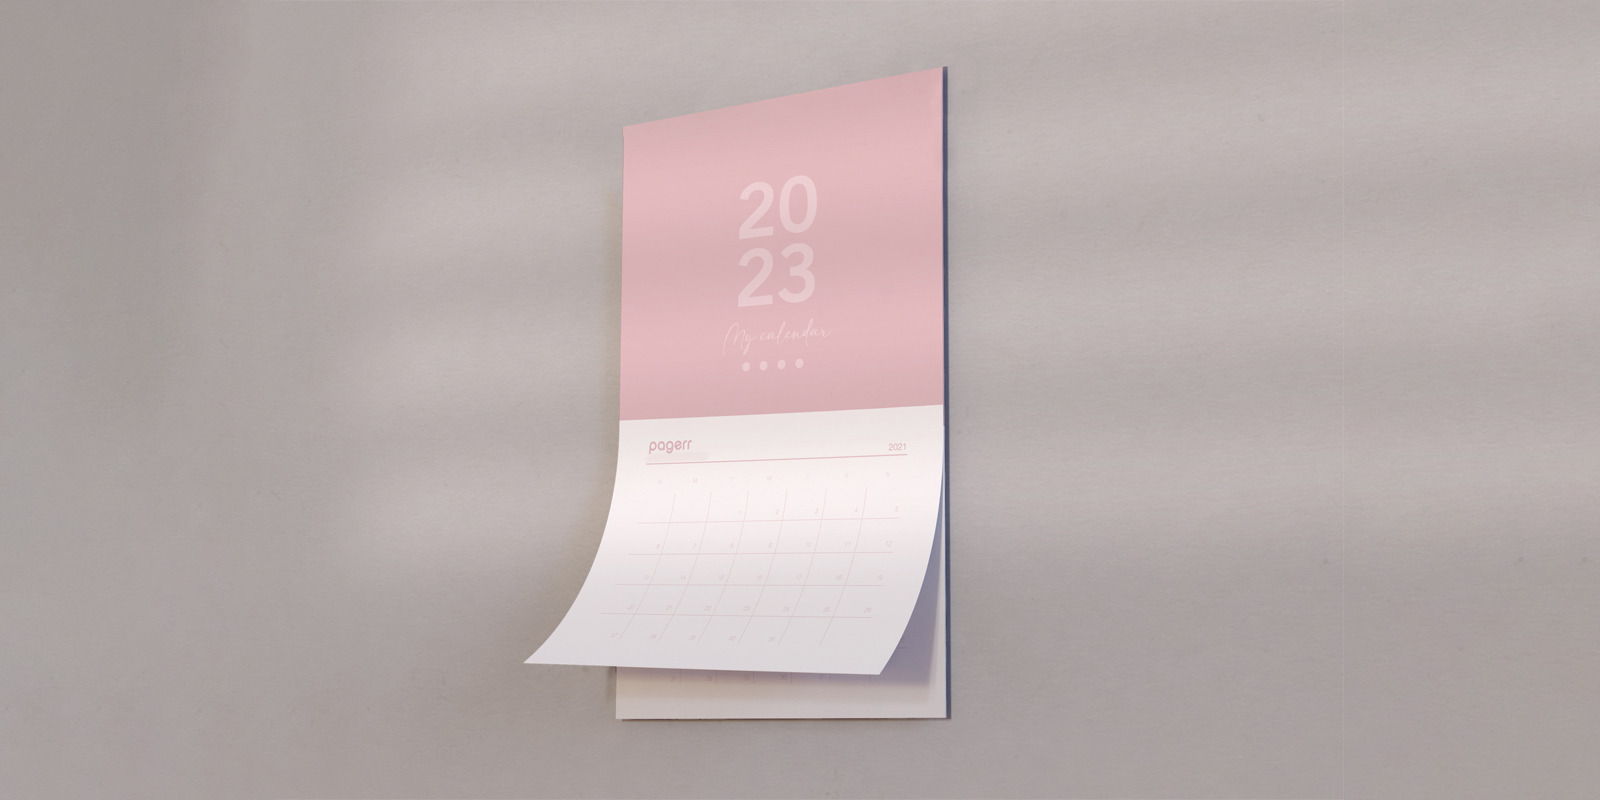 Magnetic calendars in Madrid - Print with Pagerr